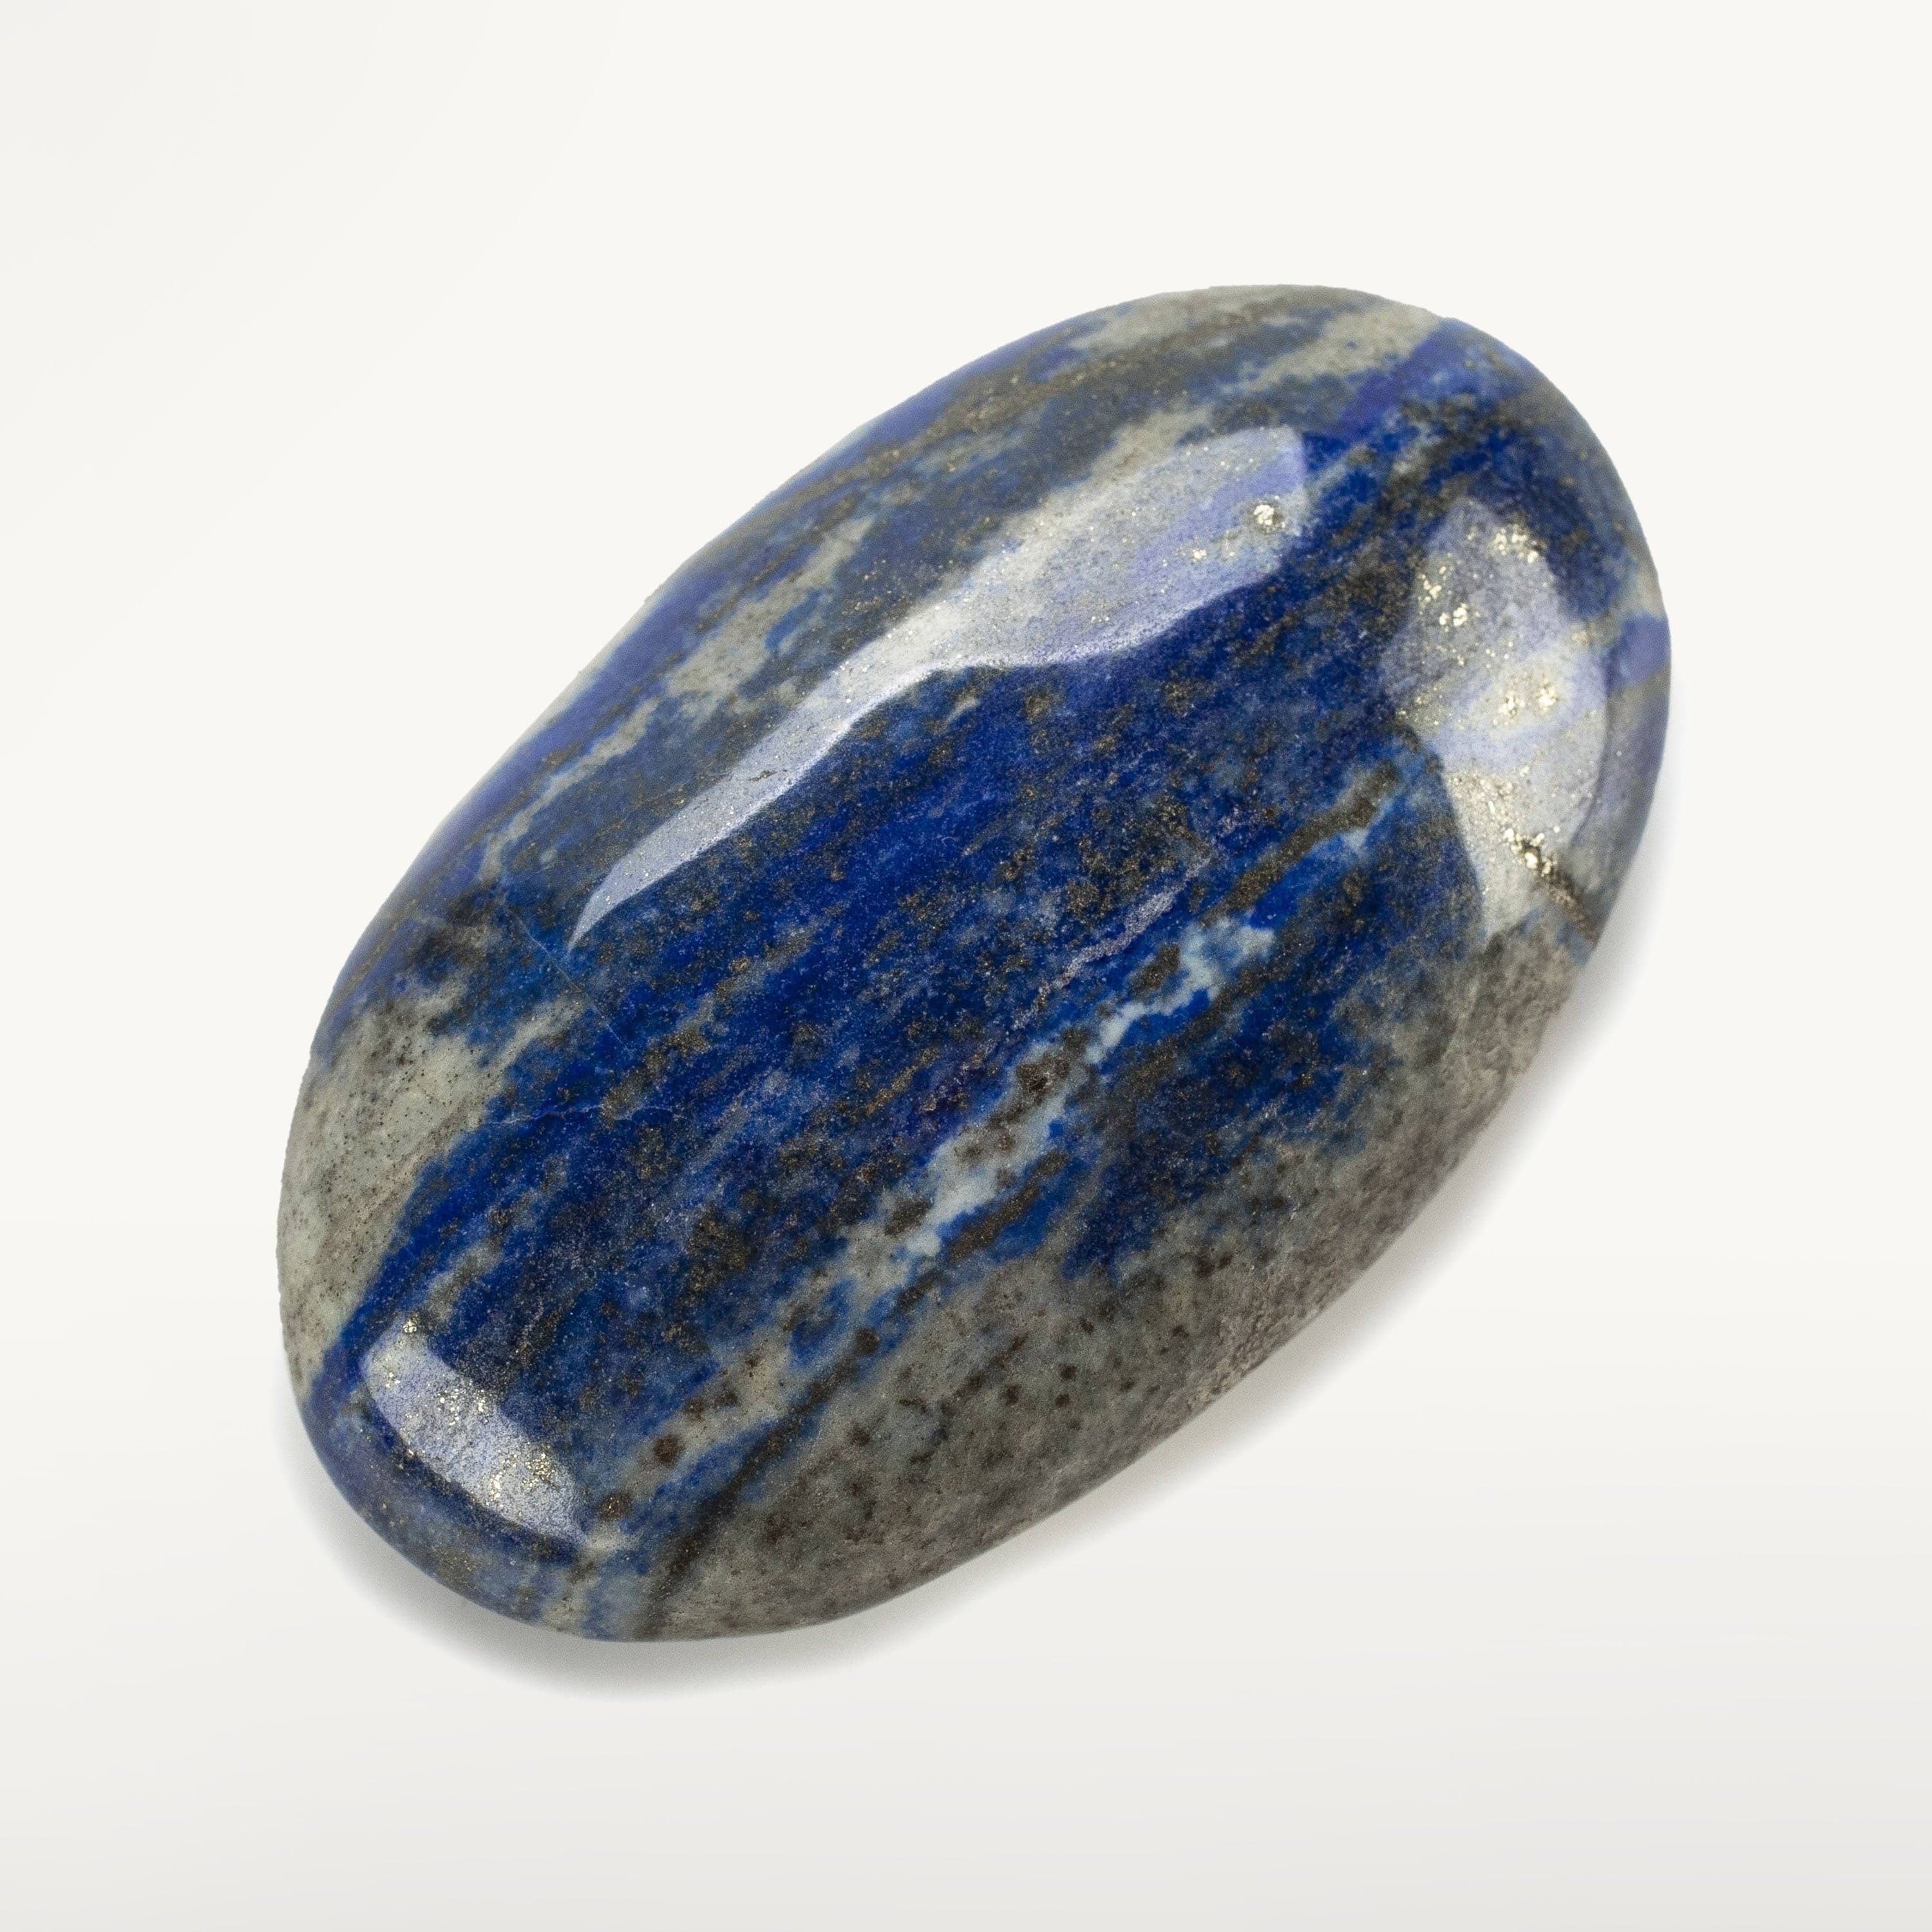 Kalifano Lapis Rare Natural Blue Lapis Lazuli Polished Palm Stone Carving from Afghanistan - 70 g LPS200.003